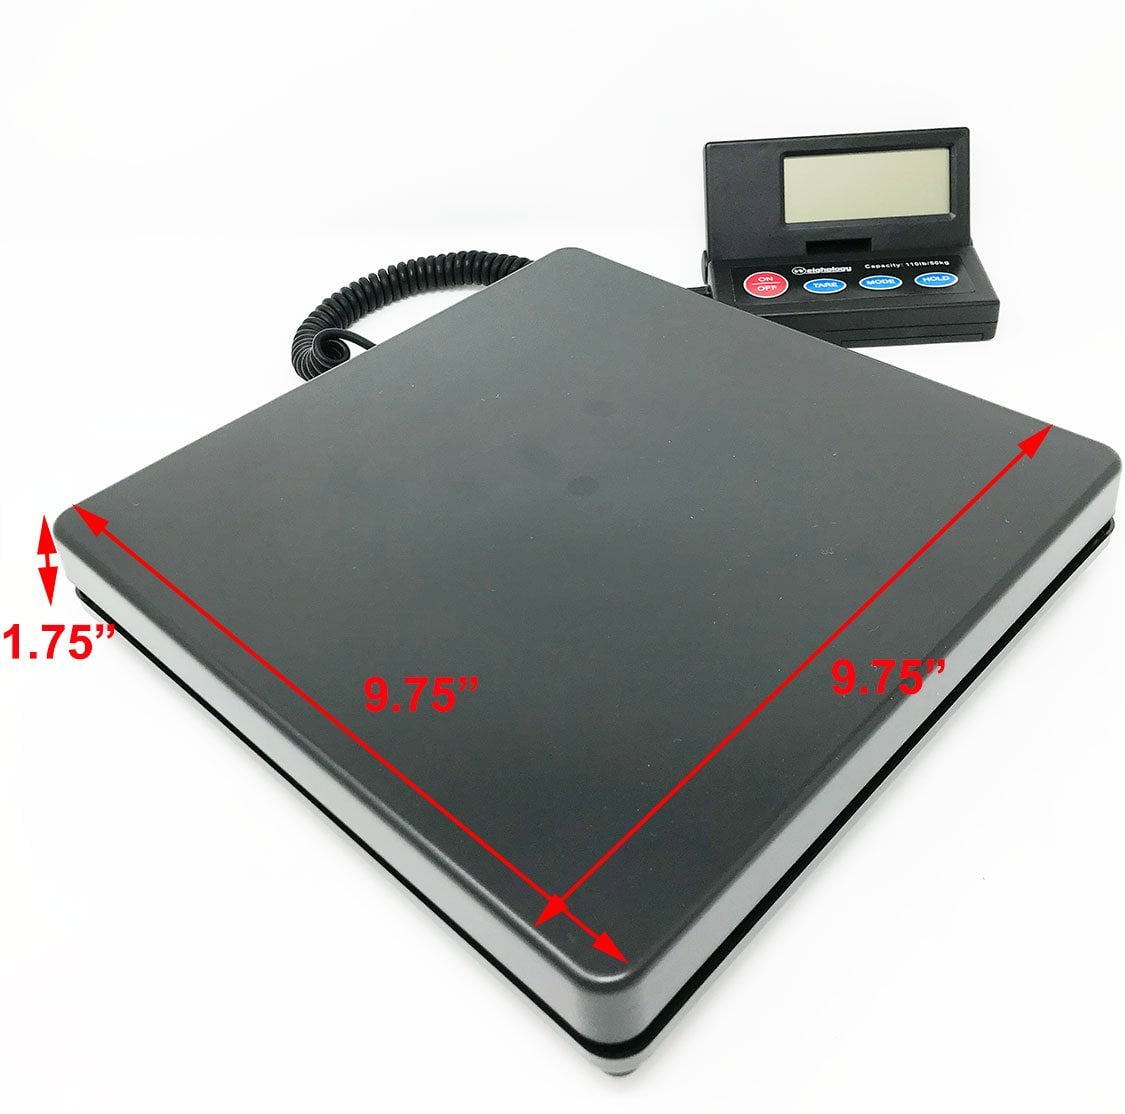 YKWQPostal Scale Weighscale Scale for Packages Postal Scale Postage Scale  Package Scale Postal Scales Mail Scale Mail Scale for Packages Weight Scale